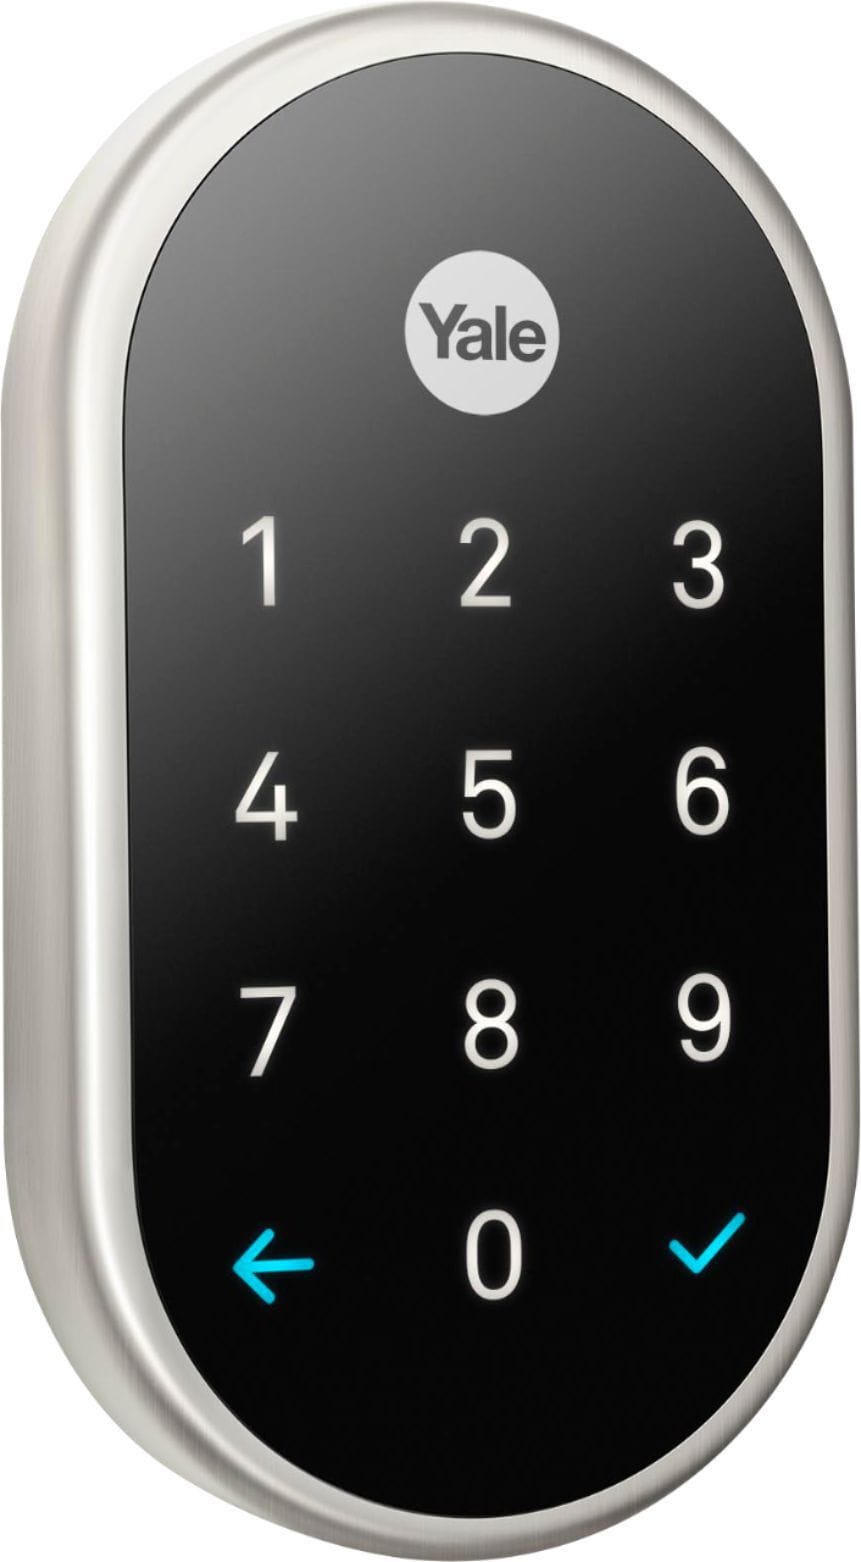 Nest Yale Lock for a Secure Connected Home